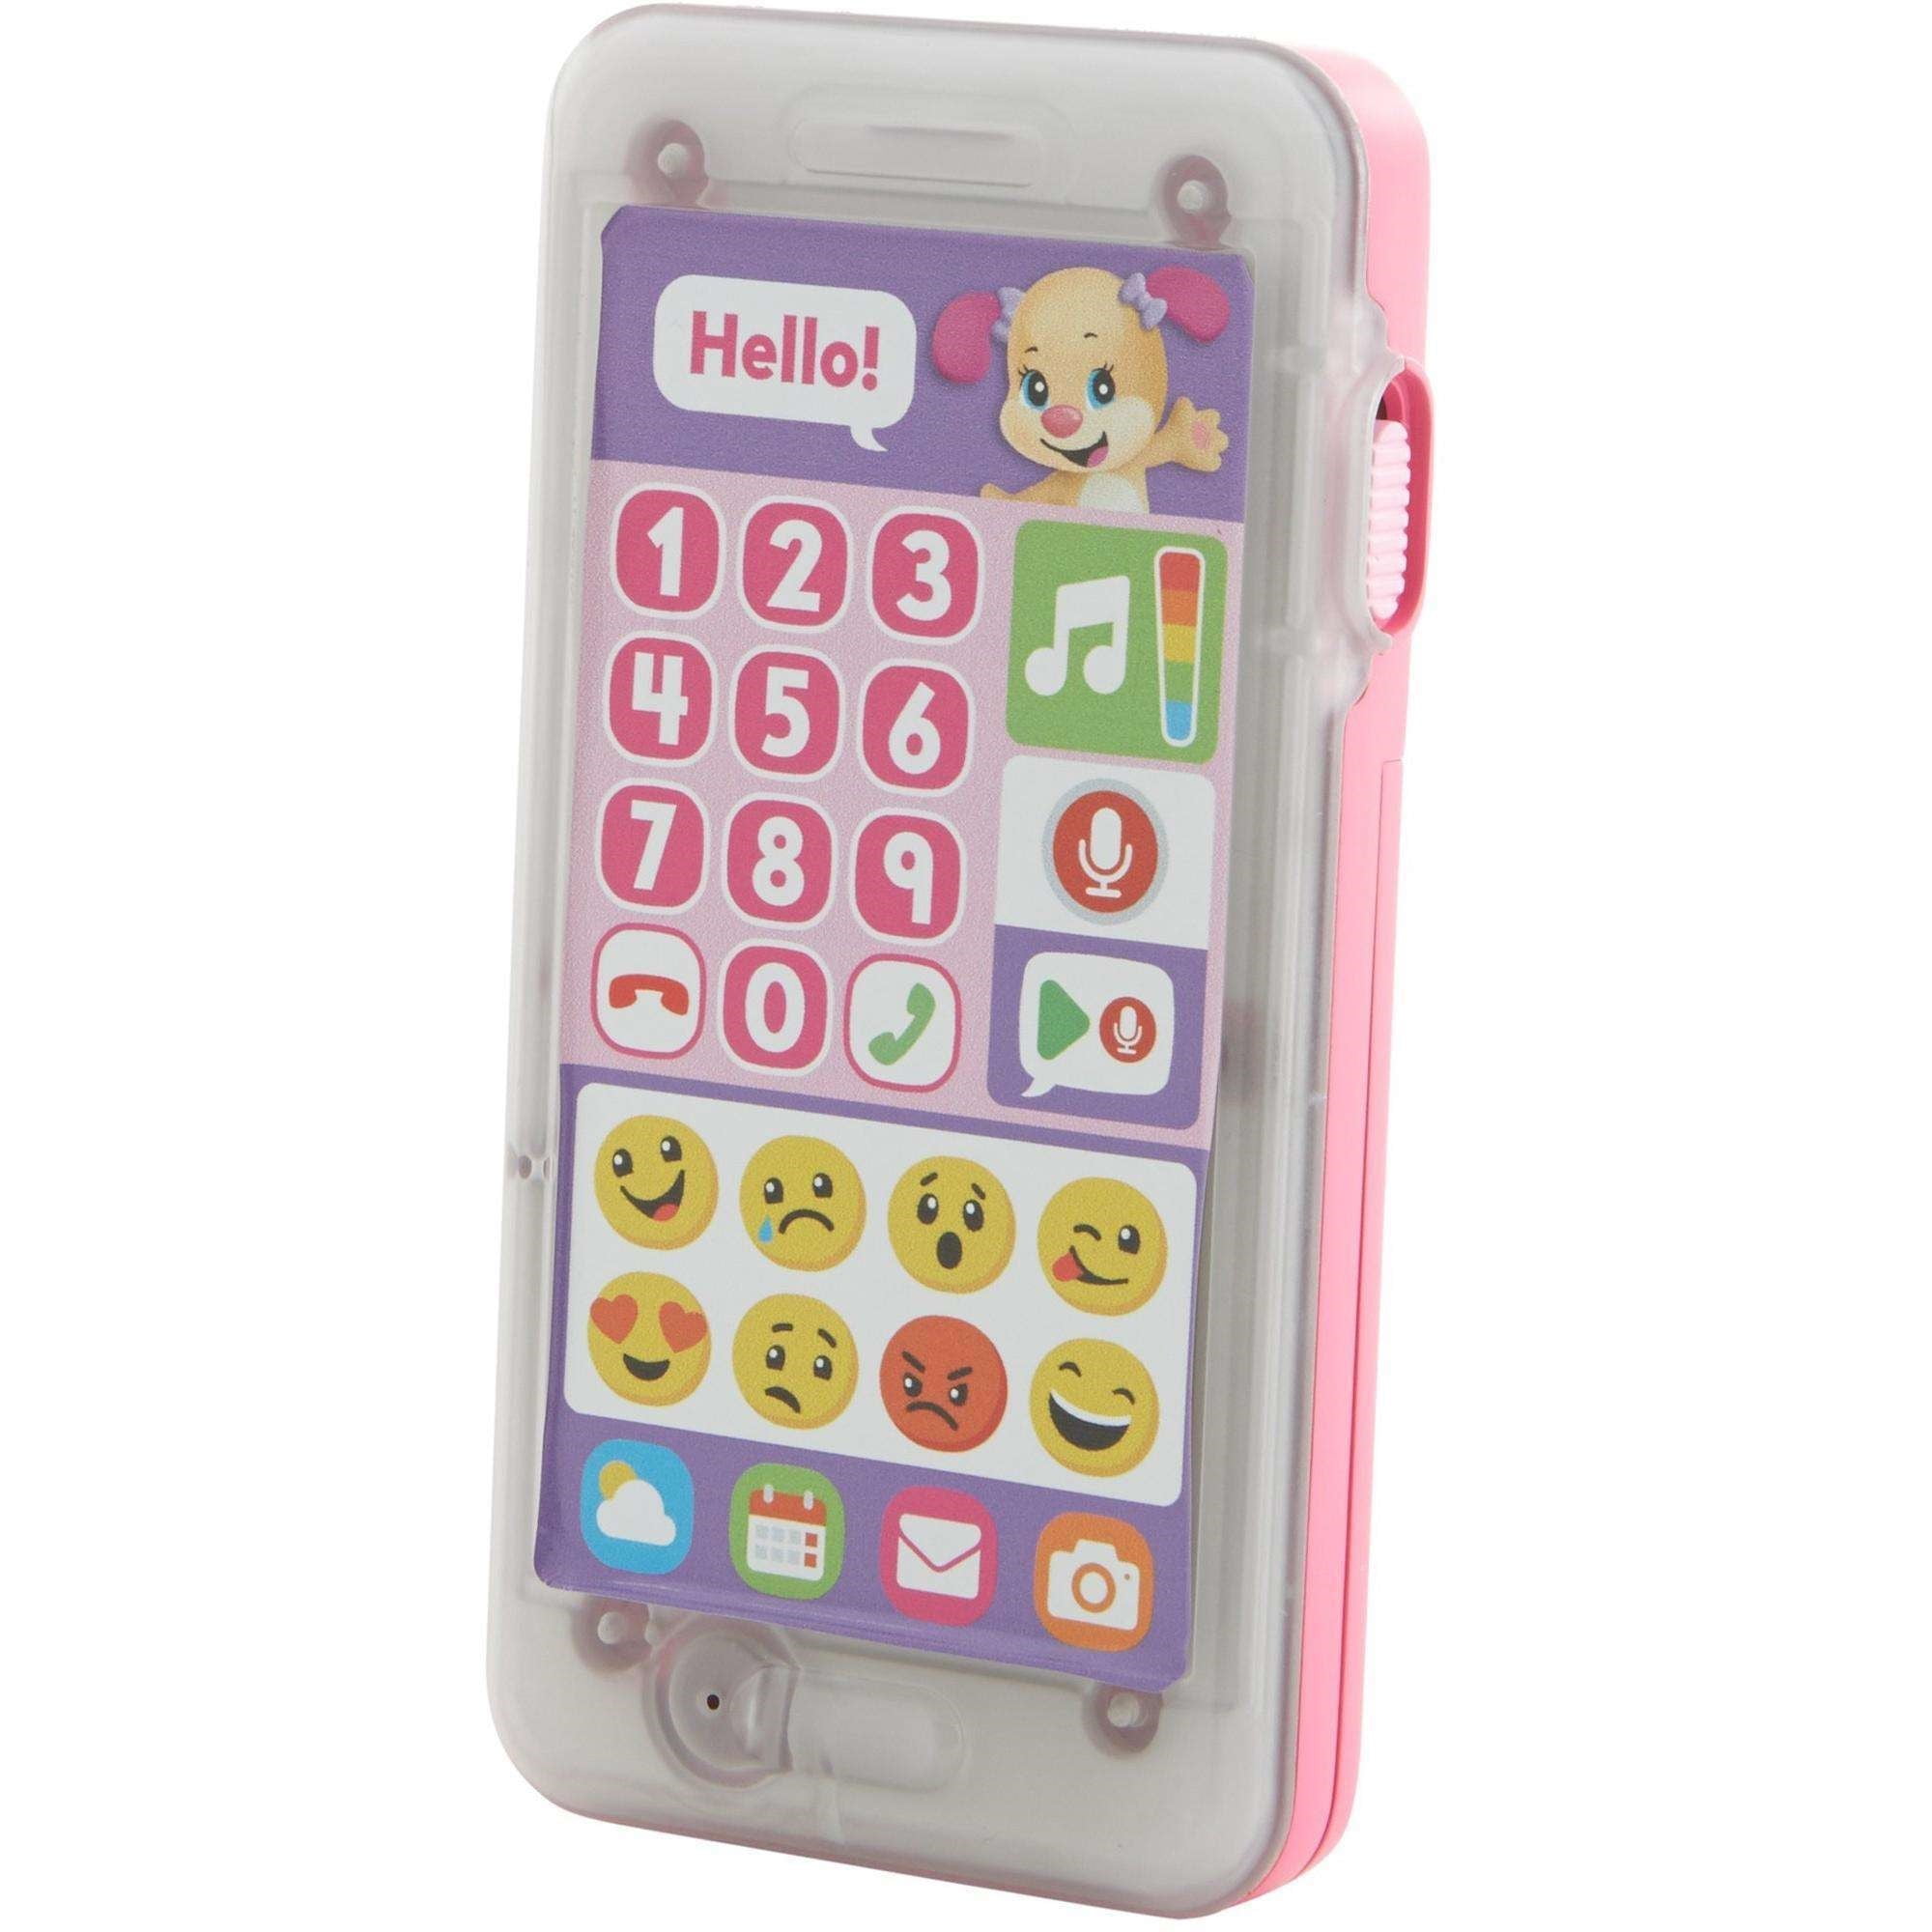 887961033823 Laugh & Learn Smart Phone Pink for sale online Fisher 